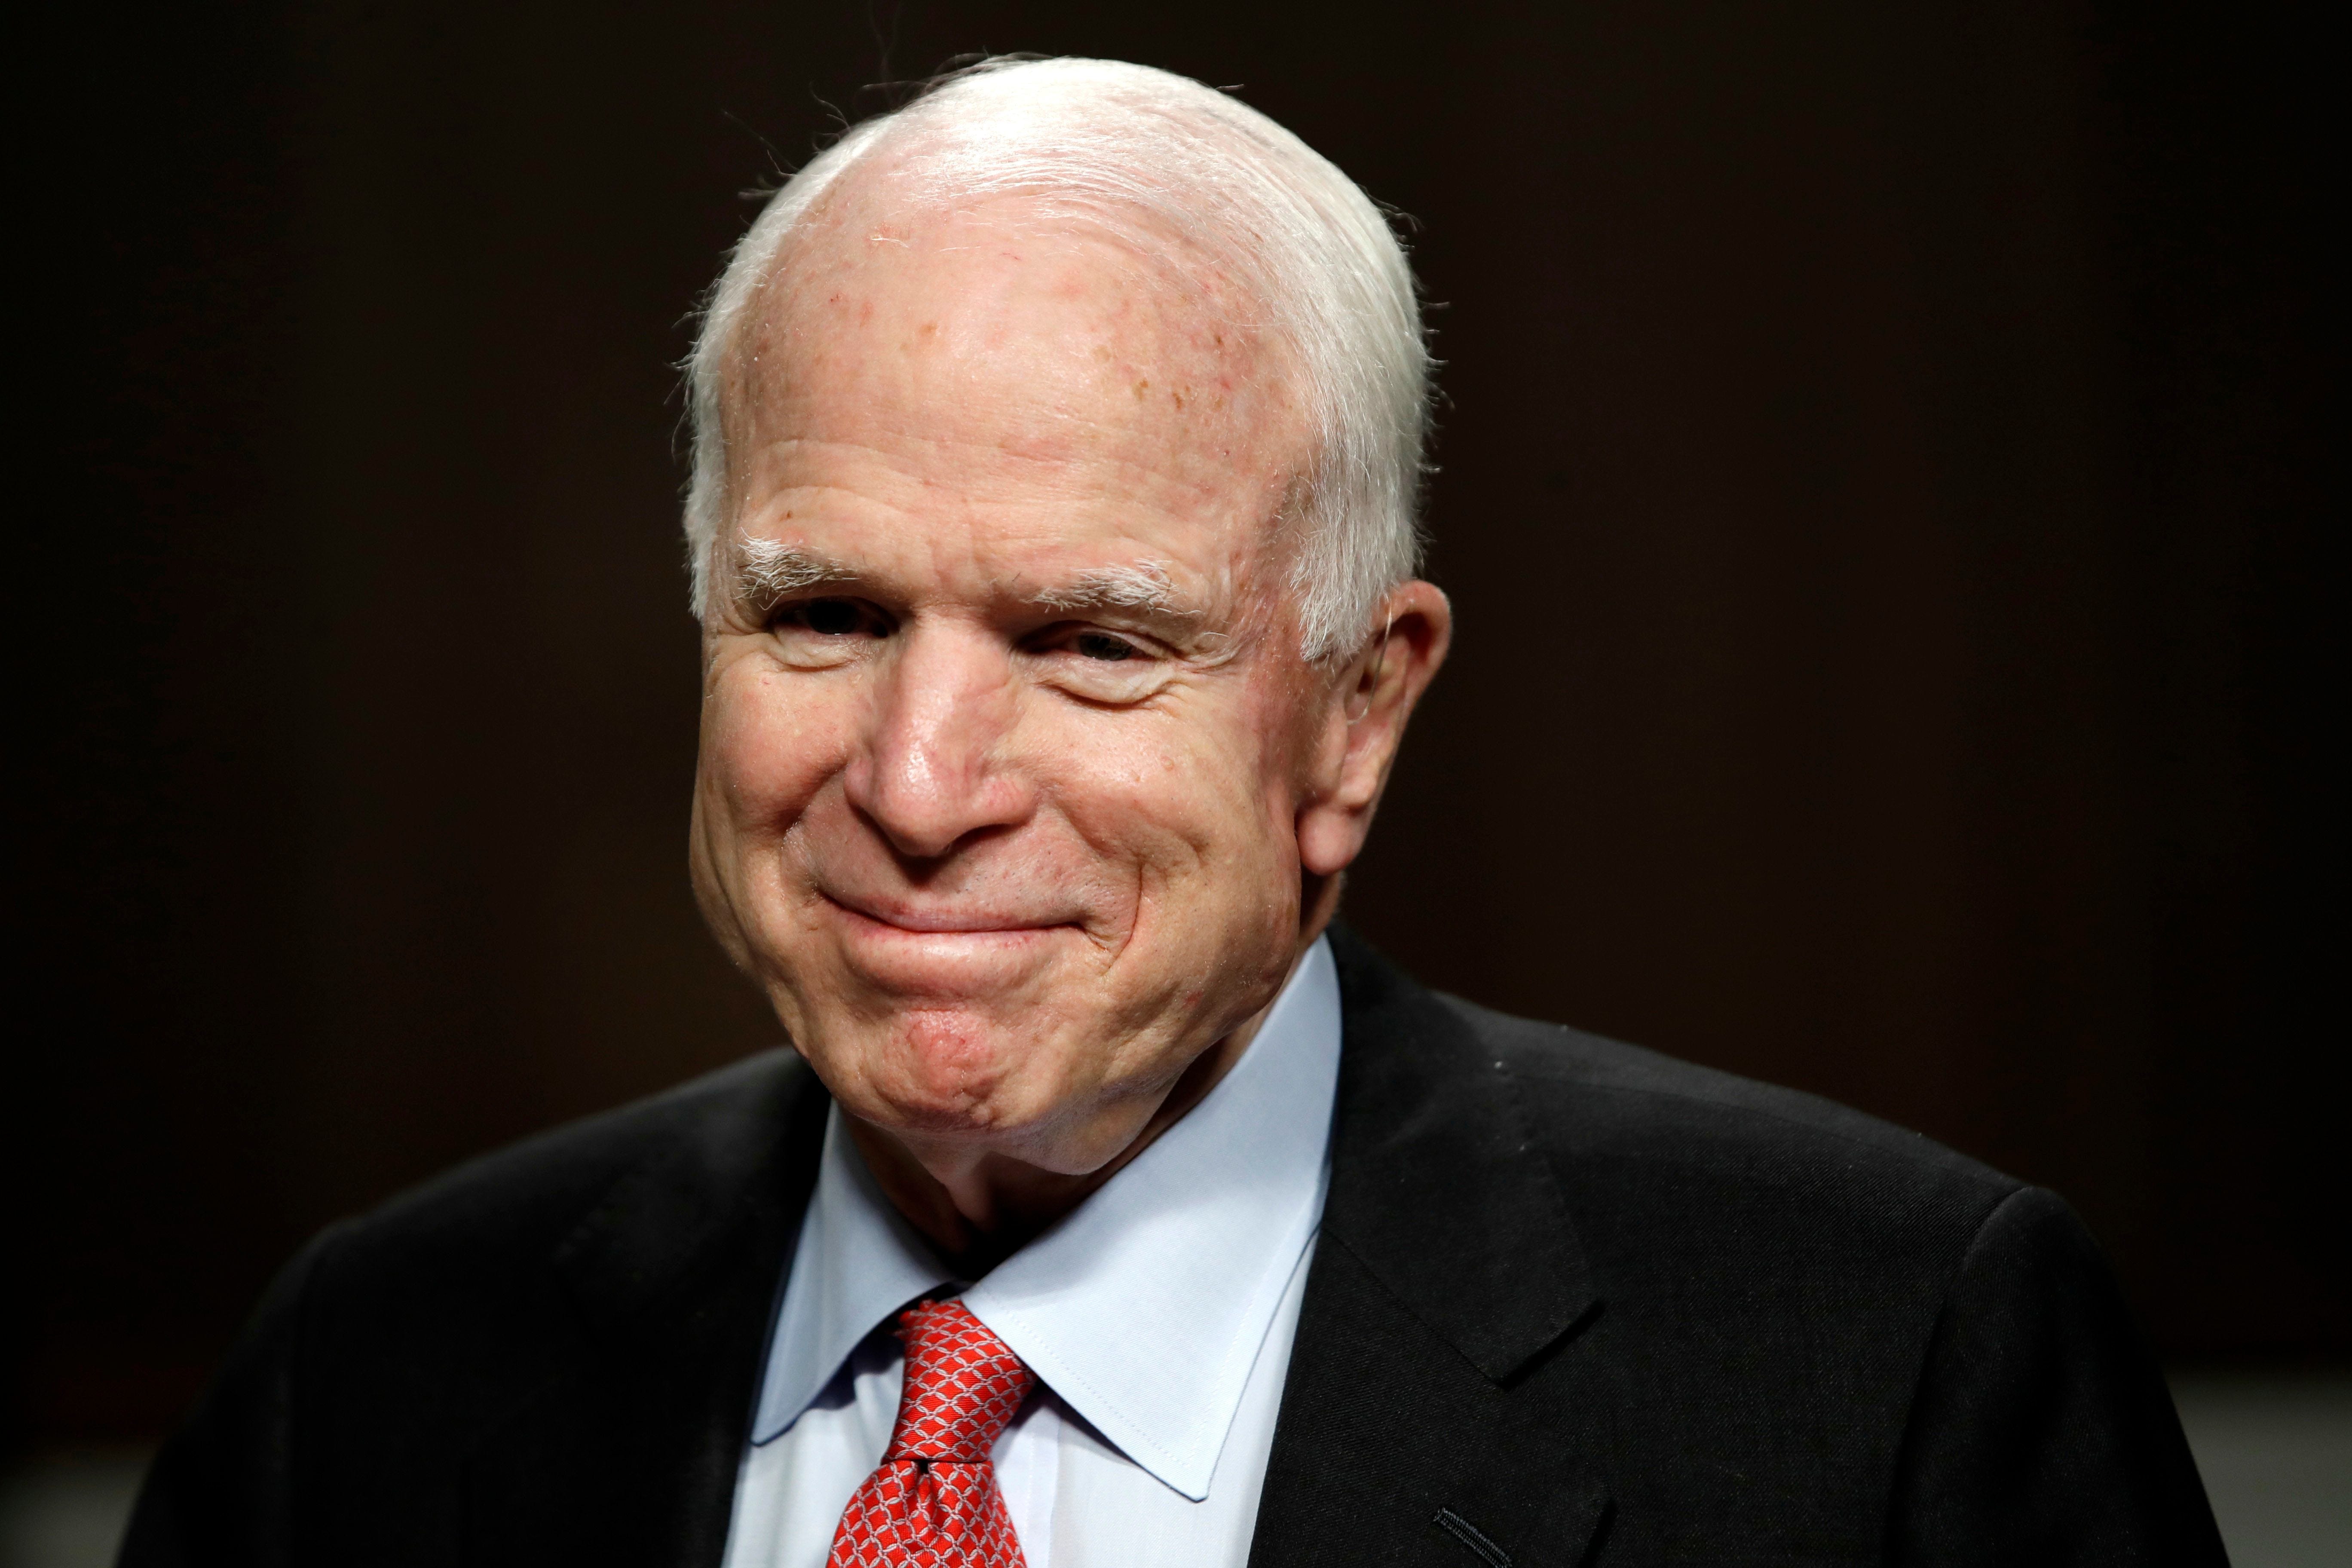 John McCain and I have the same type of brain cancer. Here's what I know about our futures.